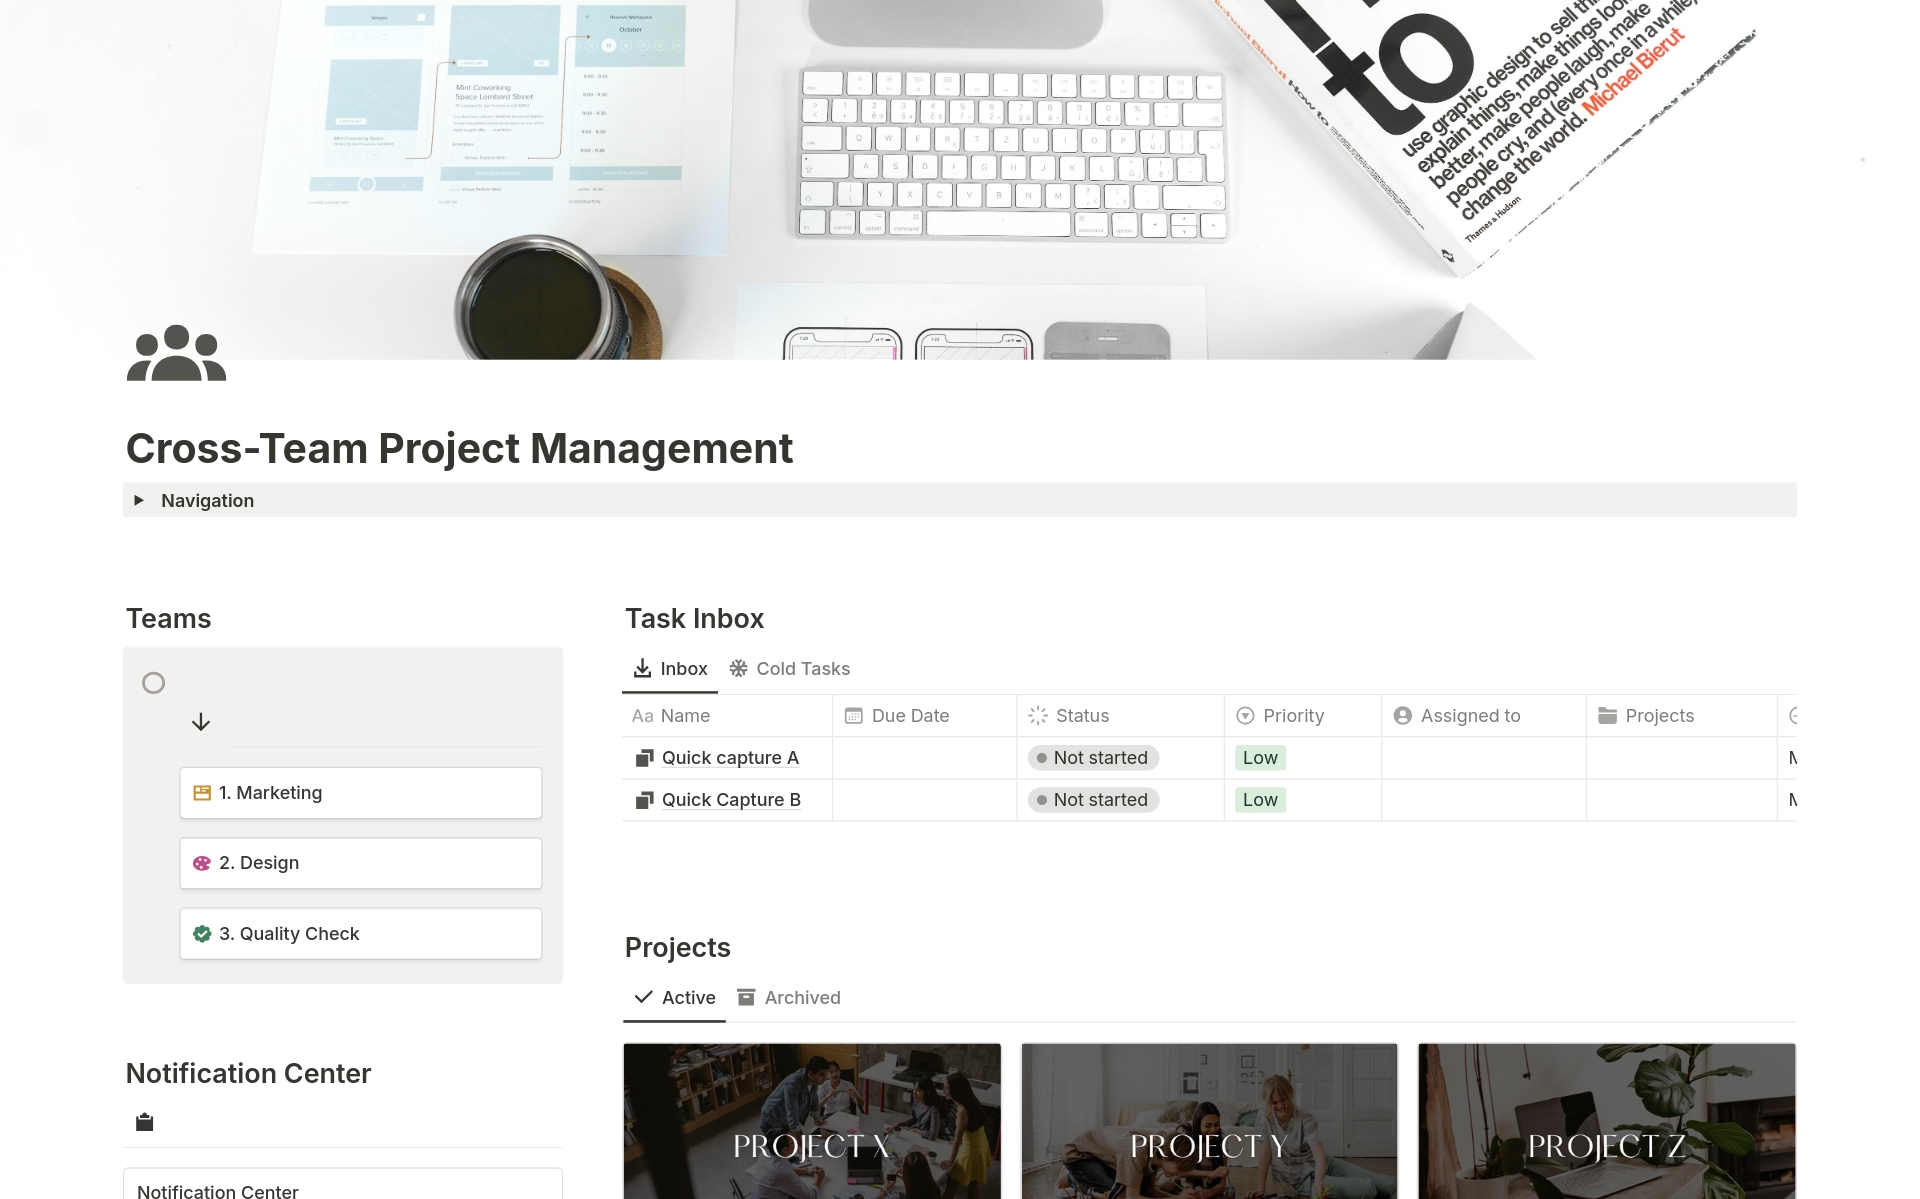 Cross-team projects got you down? This free Notion template saves the day! Keep everyone on track with tasks, deadlines & ownership. Assign tasks, manage workloads, and see project summaries - all in one place.